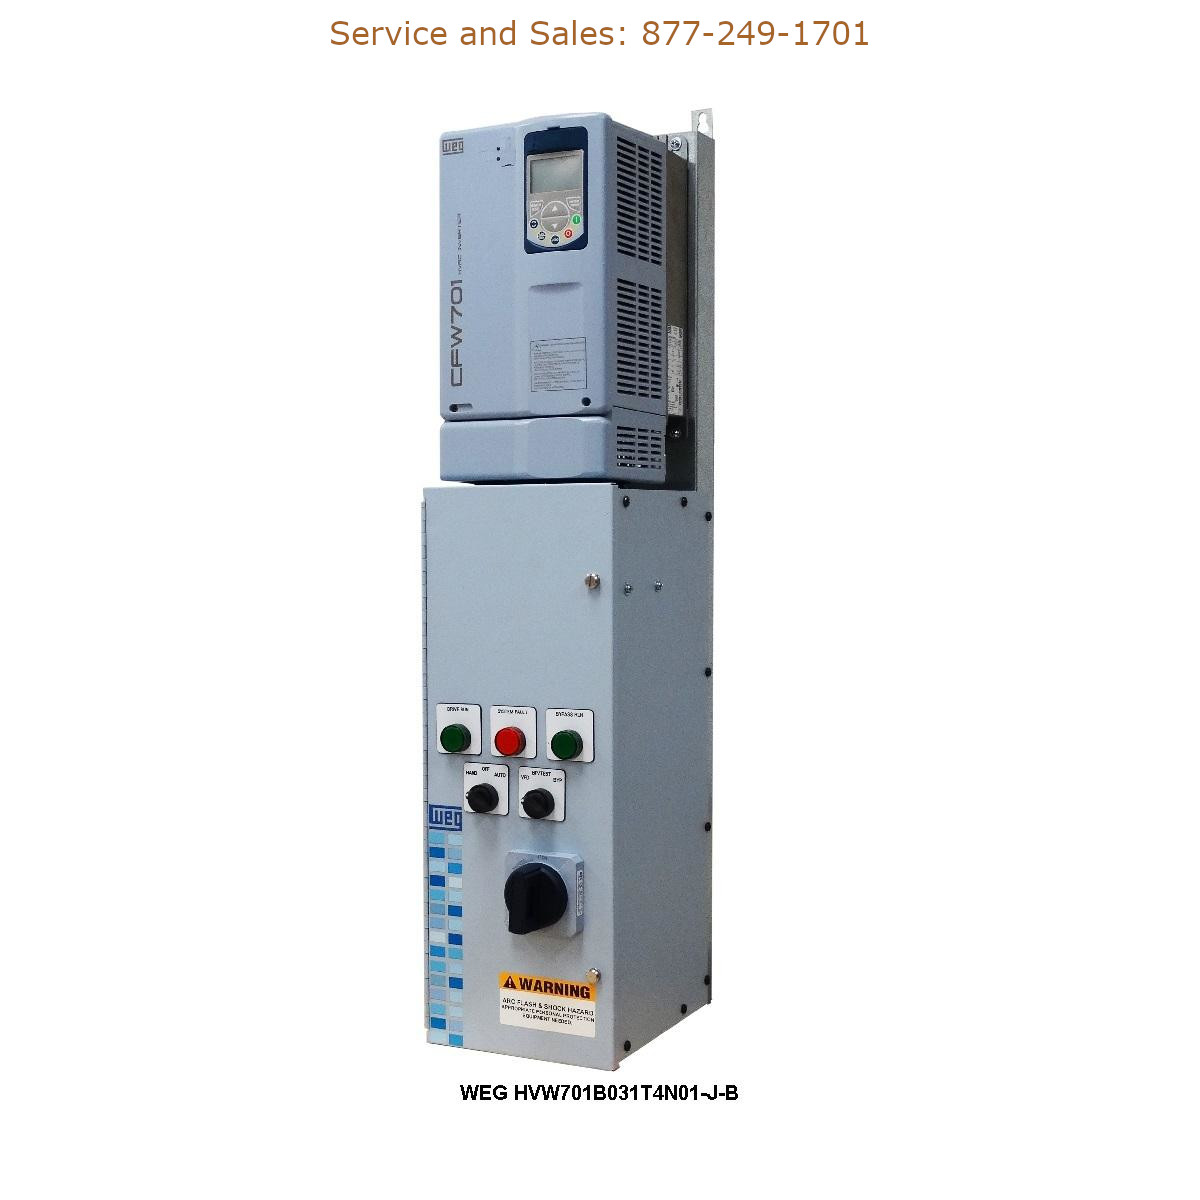 WEG HVW701B031T4N01-J-B WEG Model Number HVW701B031T4N01-J-B WEG Drives, Variable Speed Drives Repair Service, Troubleshooting, Replacement Parts https://gesrepair.com/wp-content/uploads/2022/WEG/WEG_HVW701B031T4N01-J-B_Drives_Variable_Speed_Drives.jpg